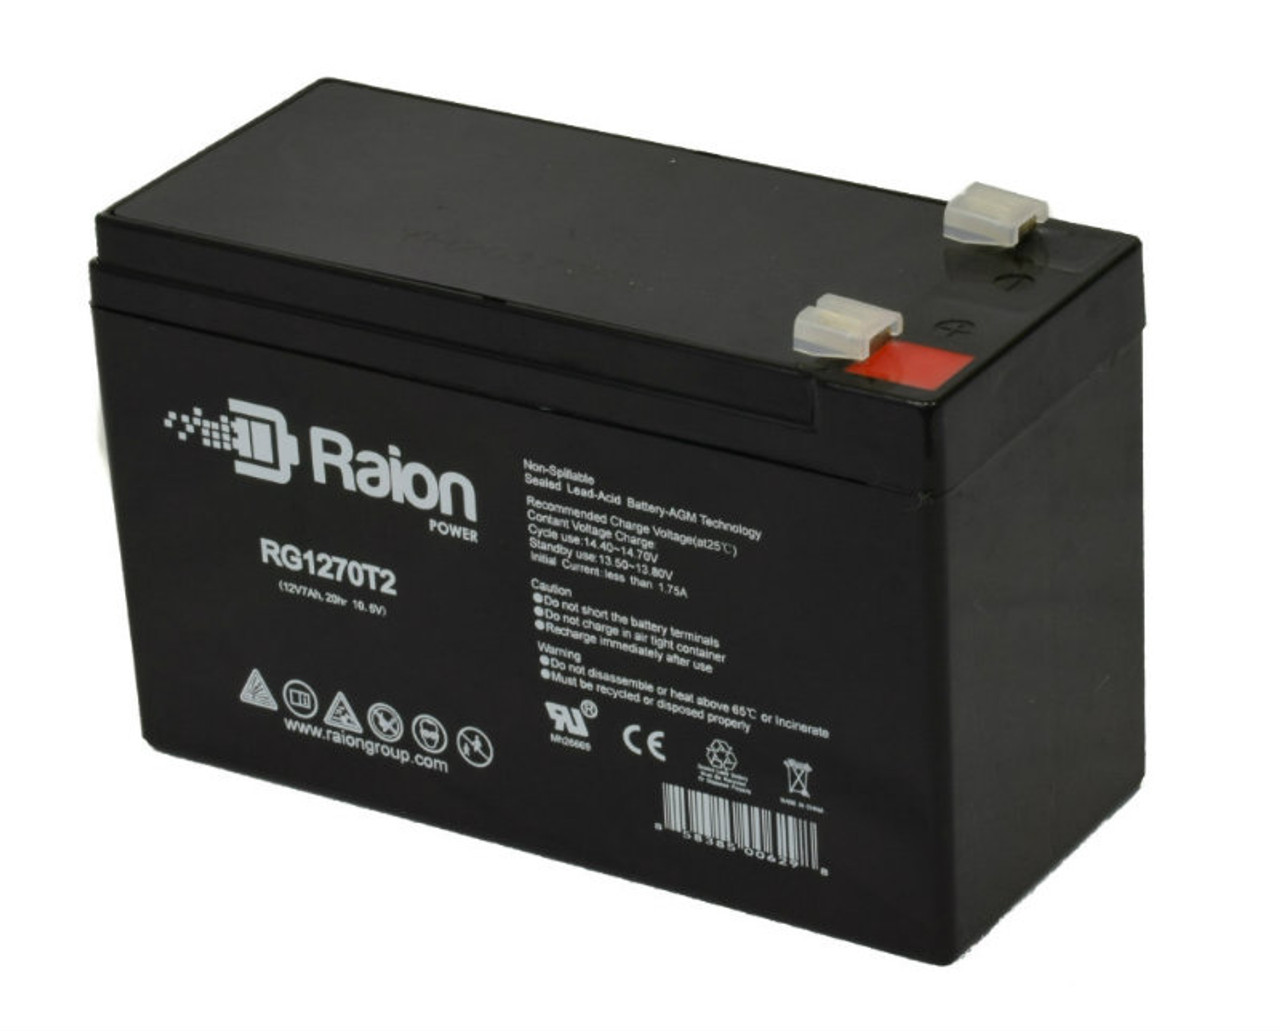 Raion Power RG1270T2 12V 7Ah Rechargeable Battery for GP GB7.2-12